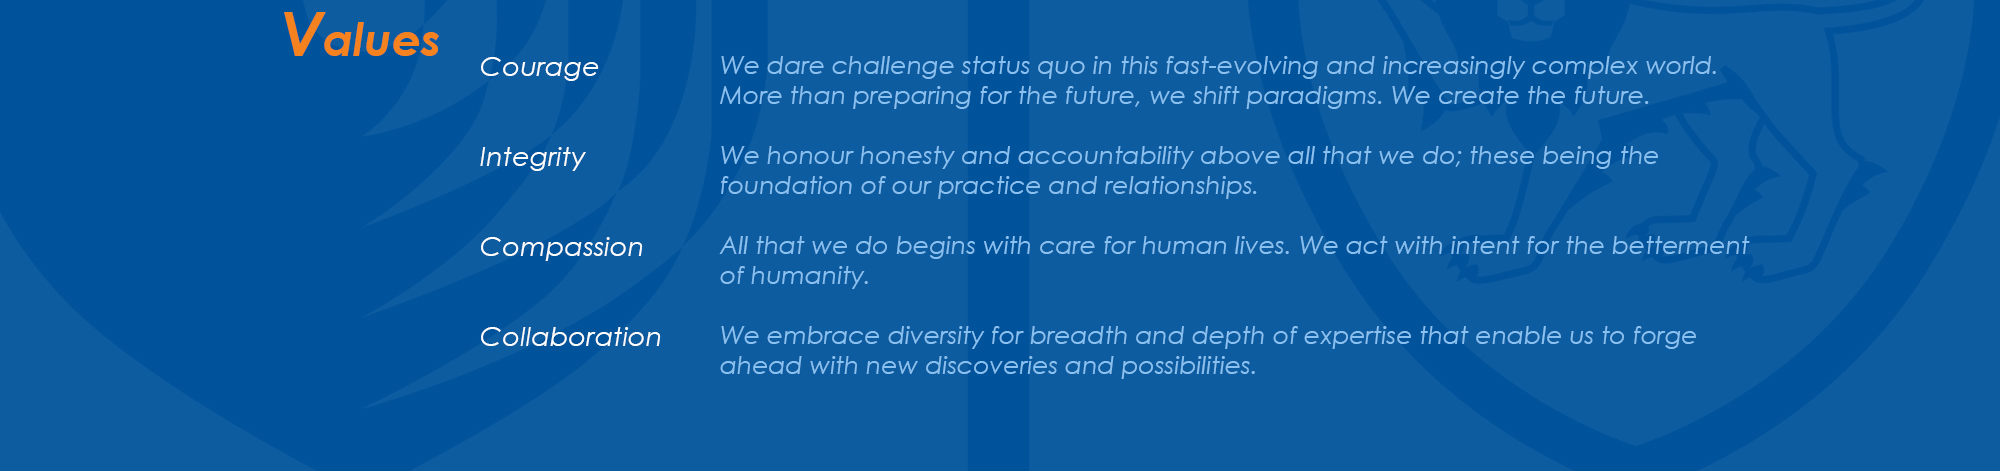 Duke-NUS&#39; values are Courage, Integrity, Compassion and Collaboration.